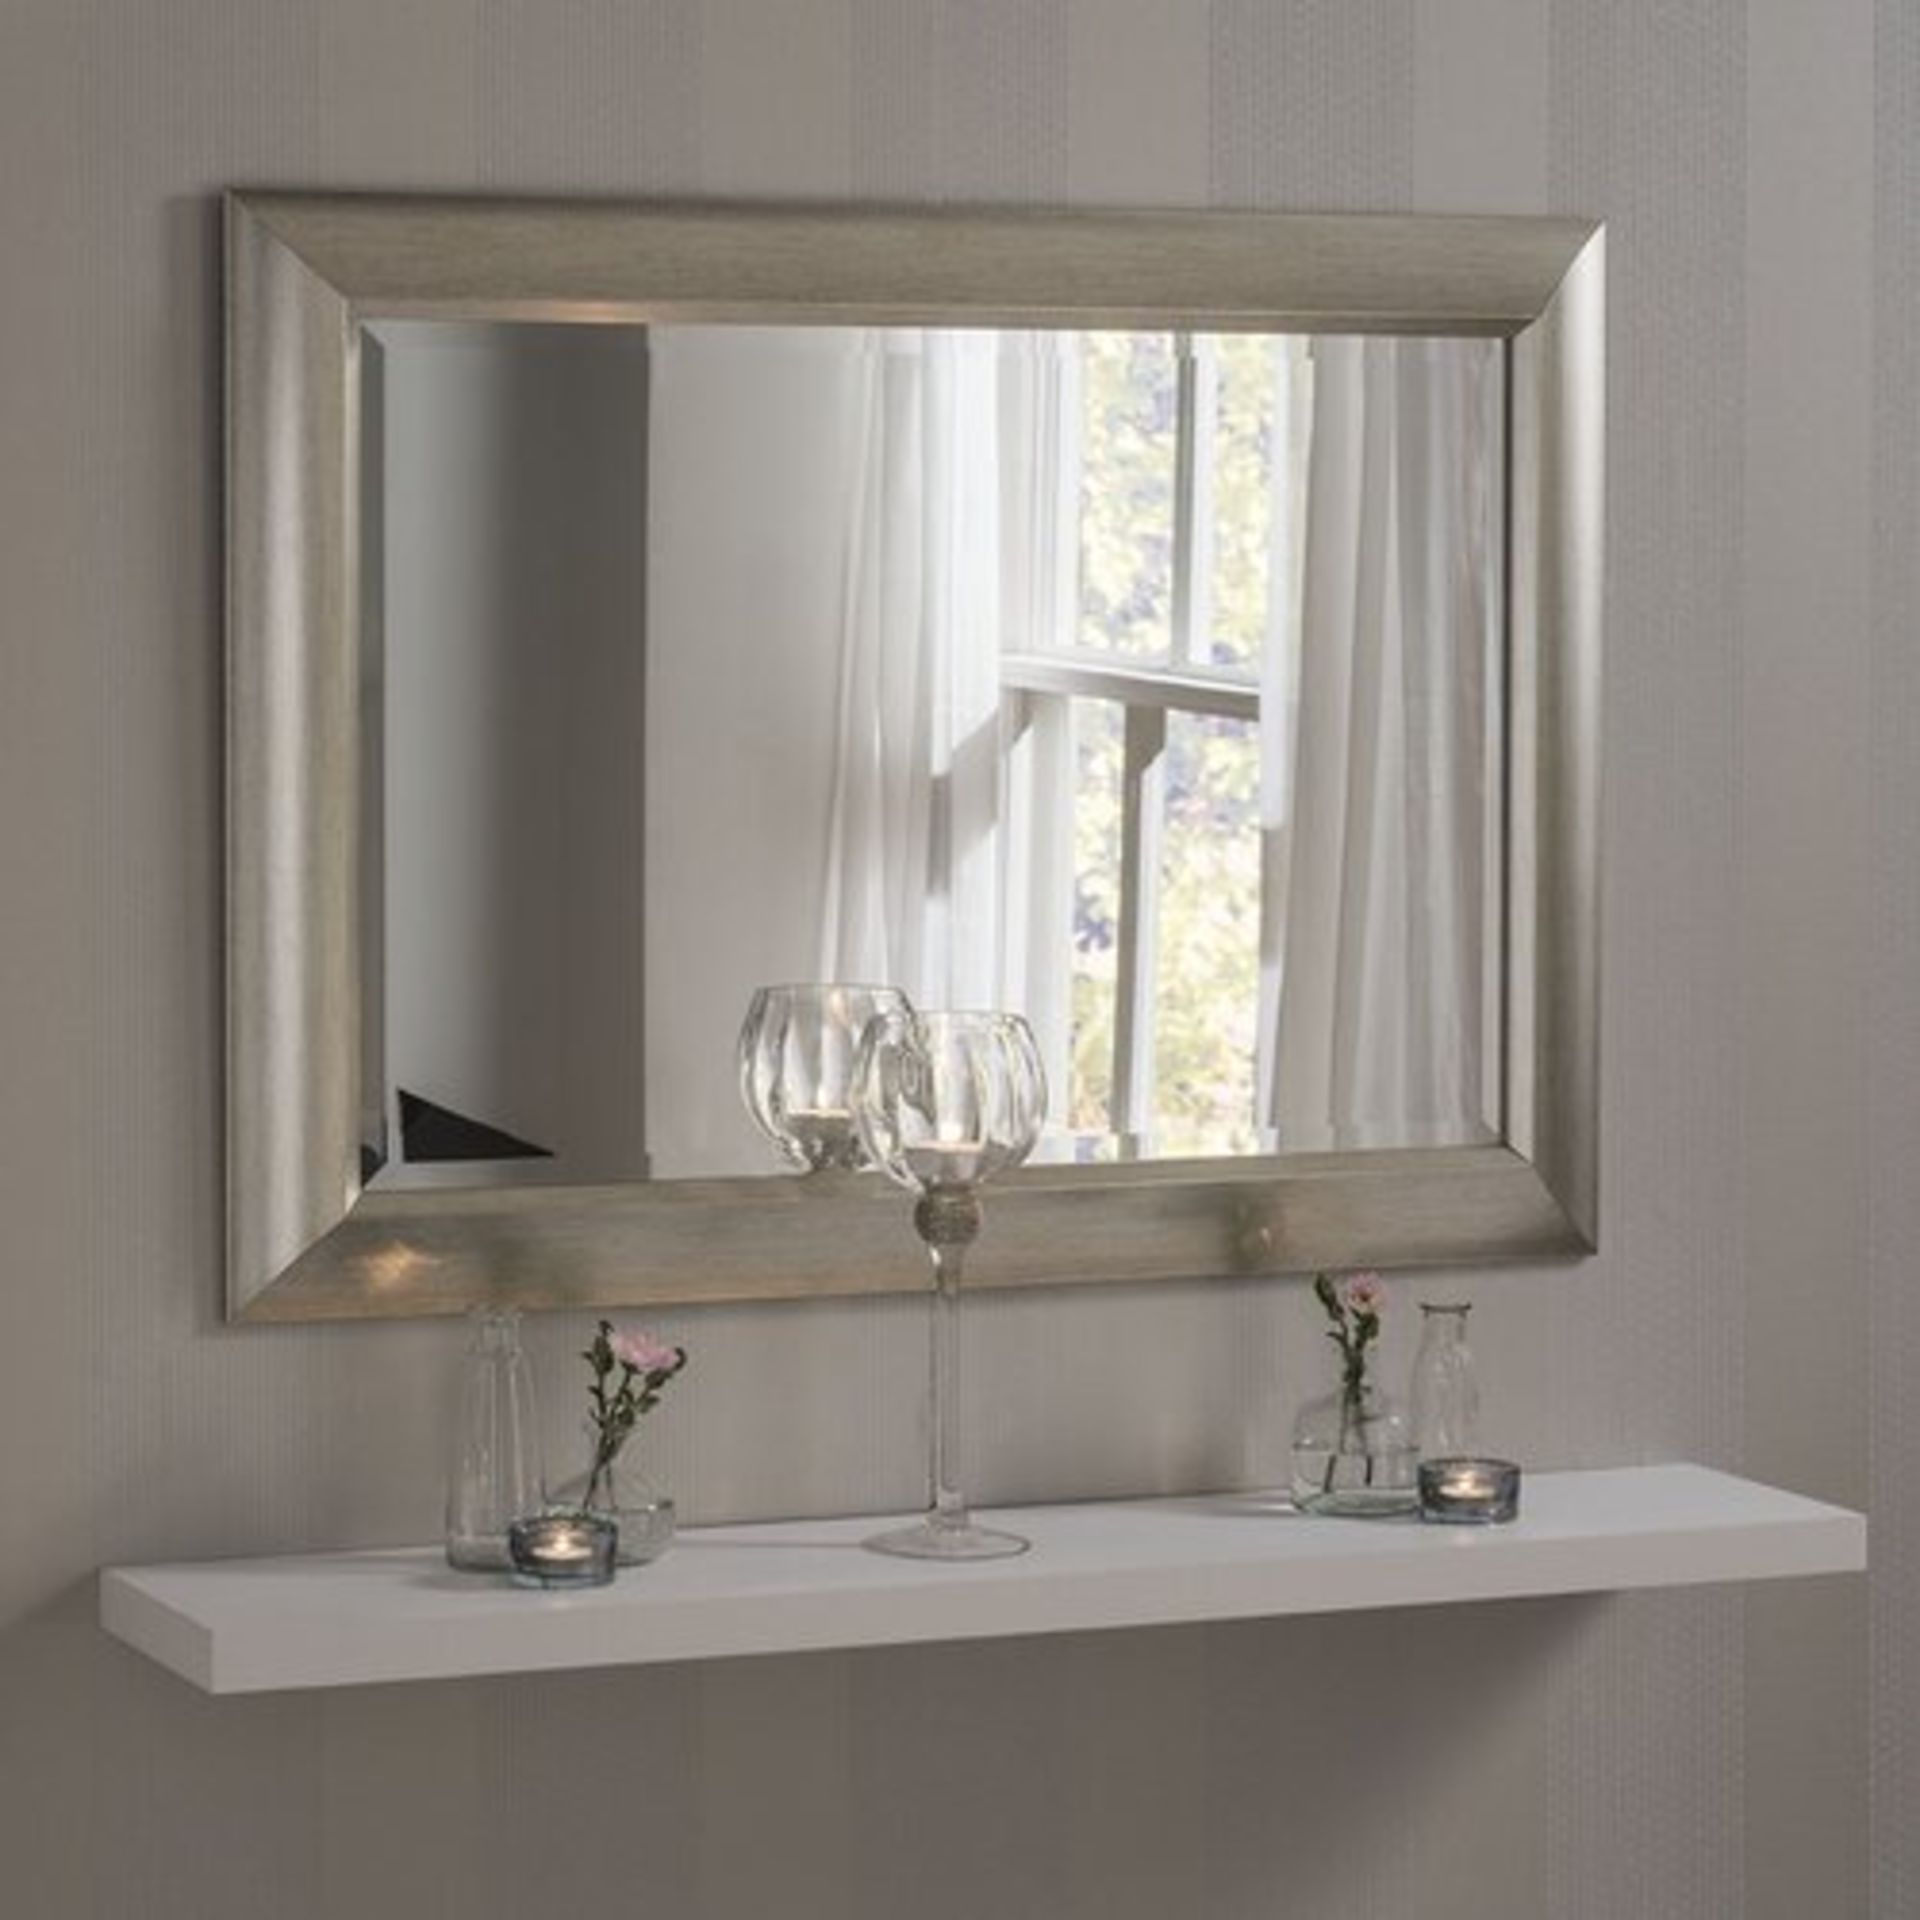 BRINKERHOFF ACCENT MIRROR SIZE 64X80 RRP £111.99Condition ReportAppraisal Available on Request- - Image 2 of 3